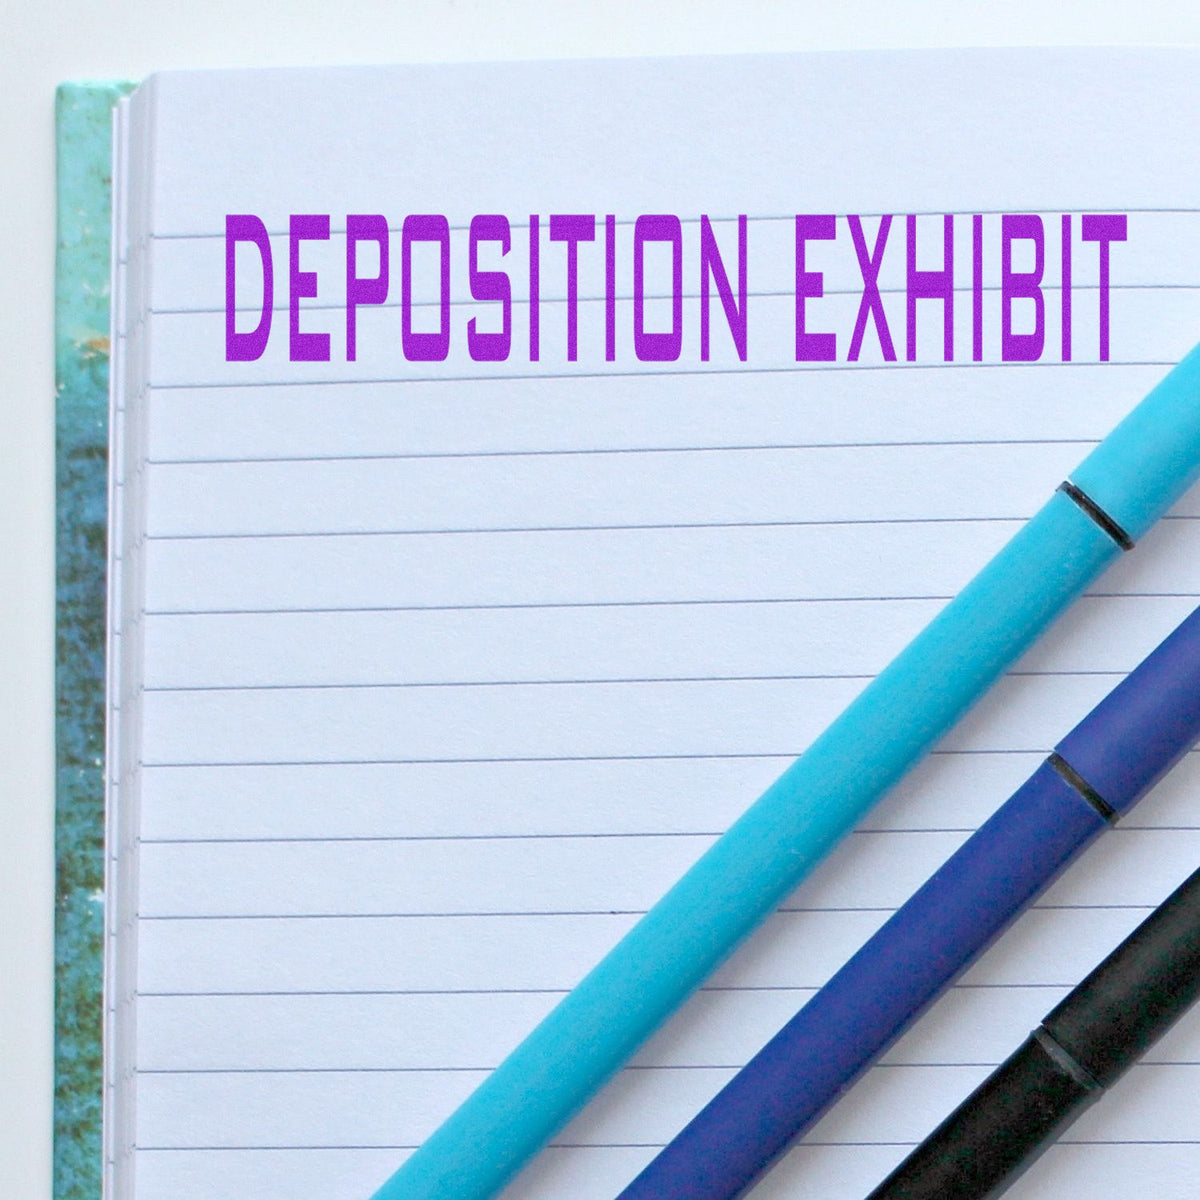 Large Deposition Exhibit Rubber Stamp In Use